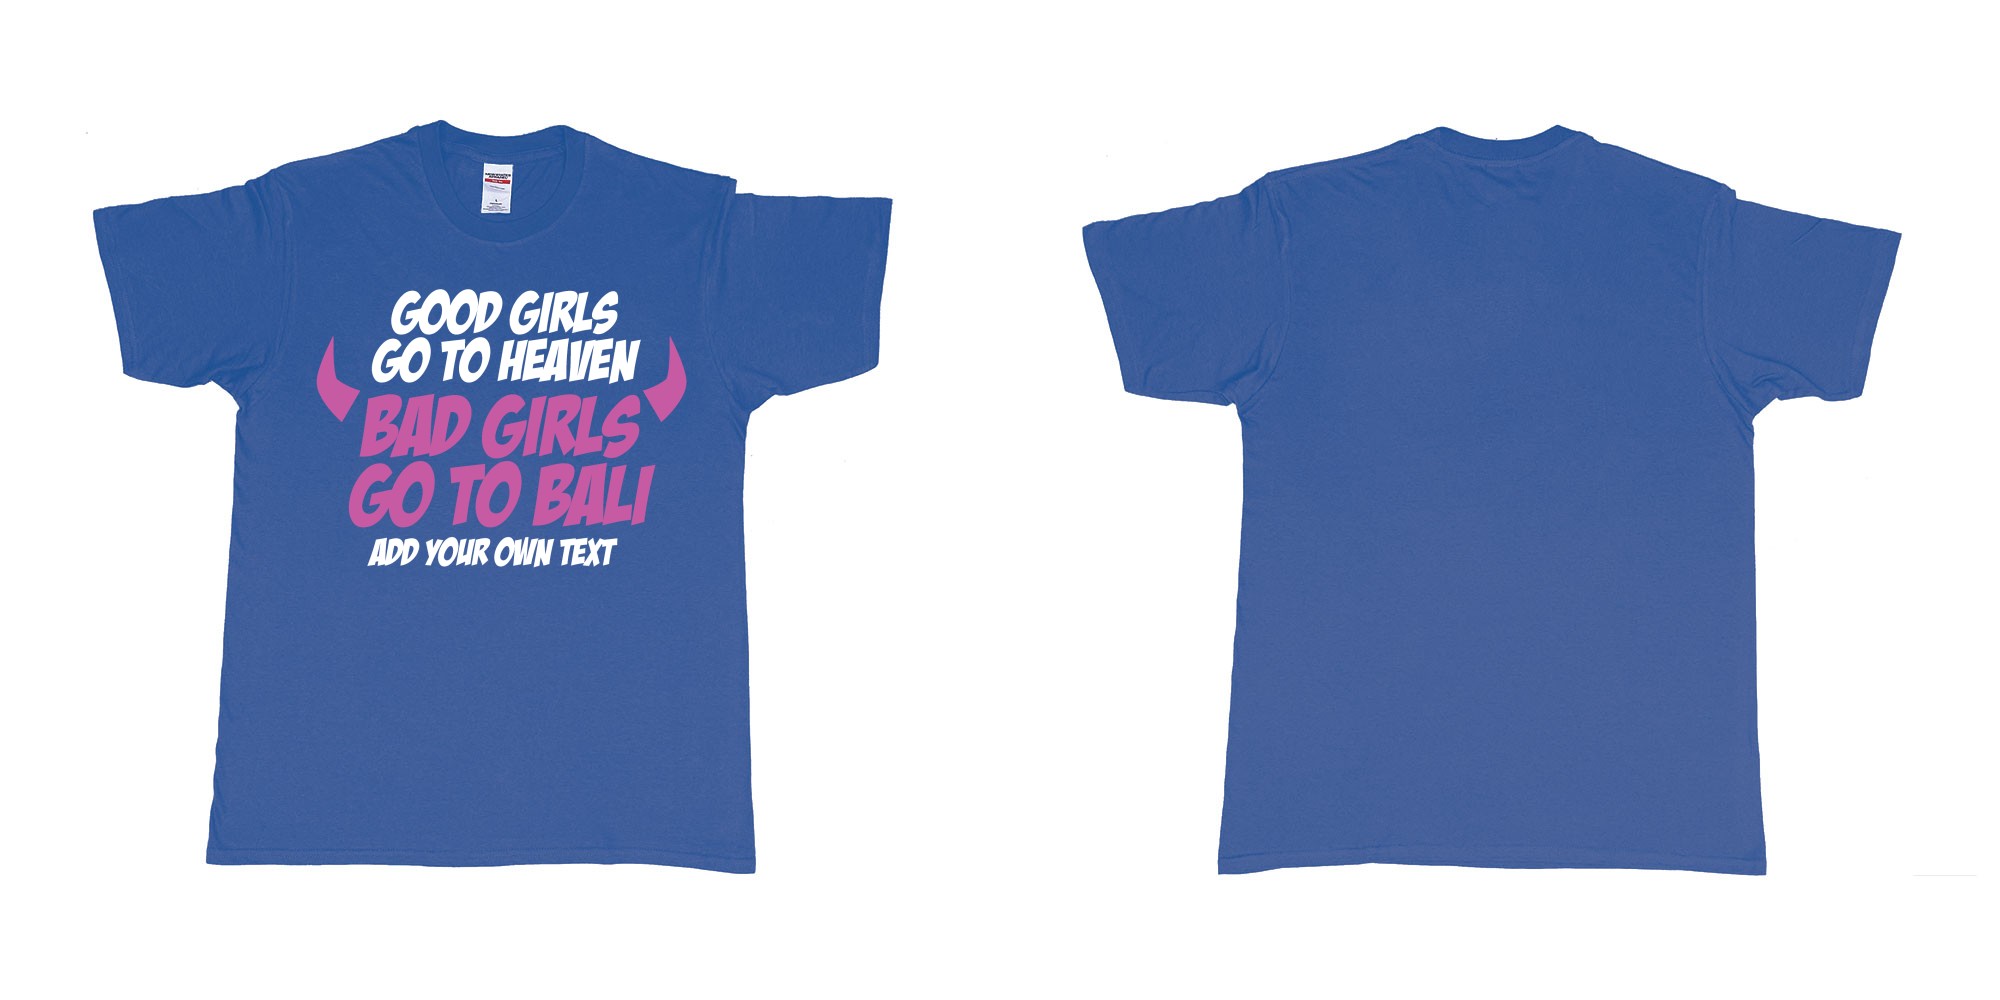 Custom tshirt design good girls go to heaven bad girls go to bali in fabric color royal-blue choice your own text made in Bali by The Pirate Way